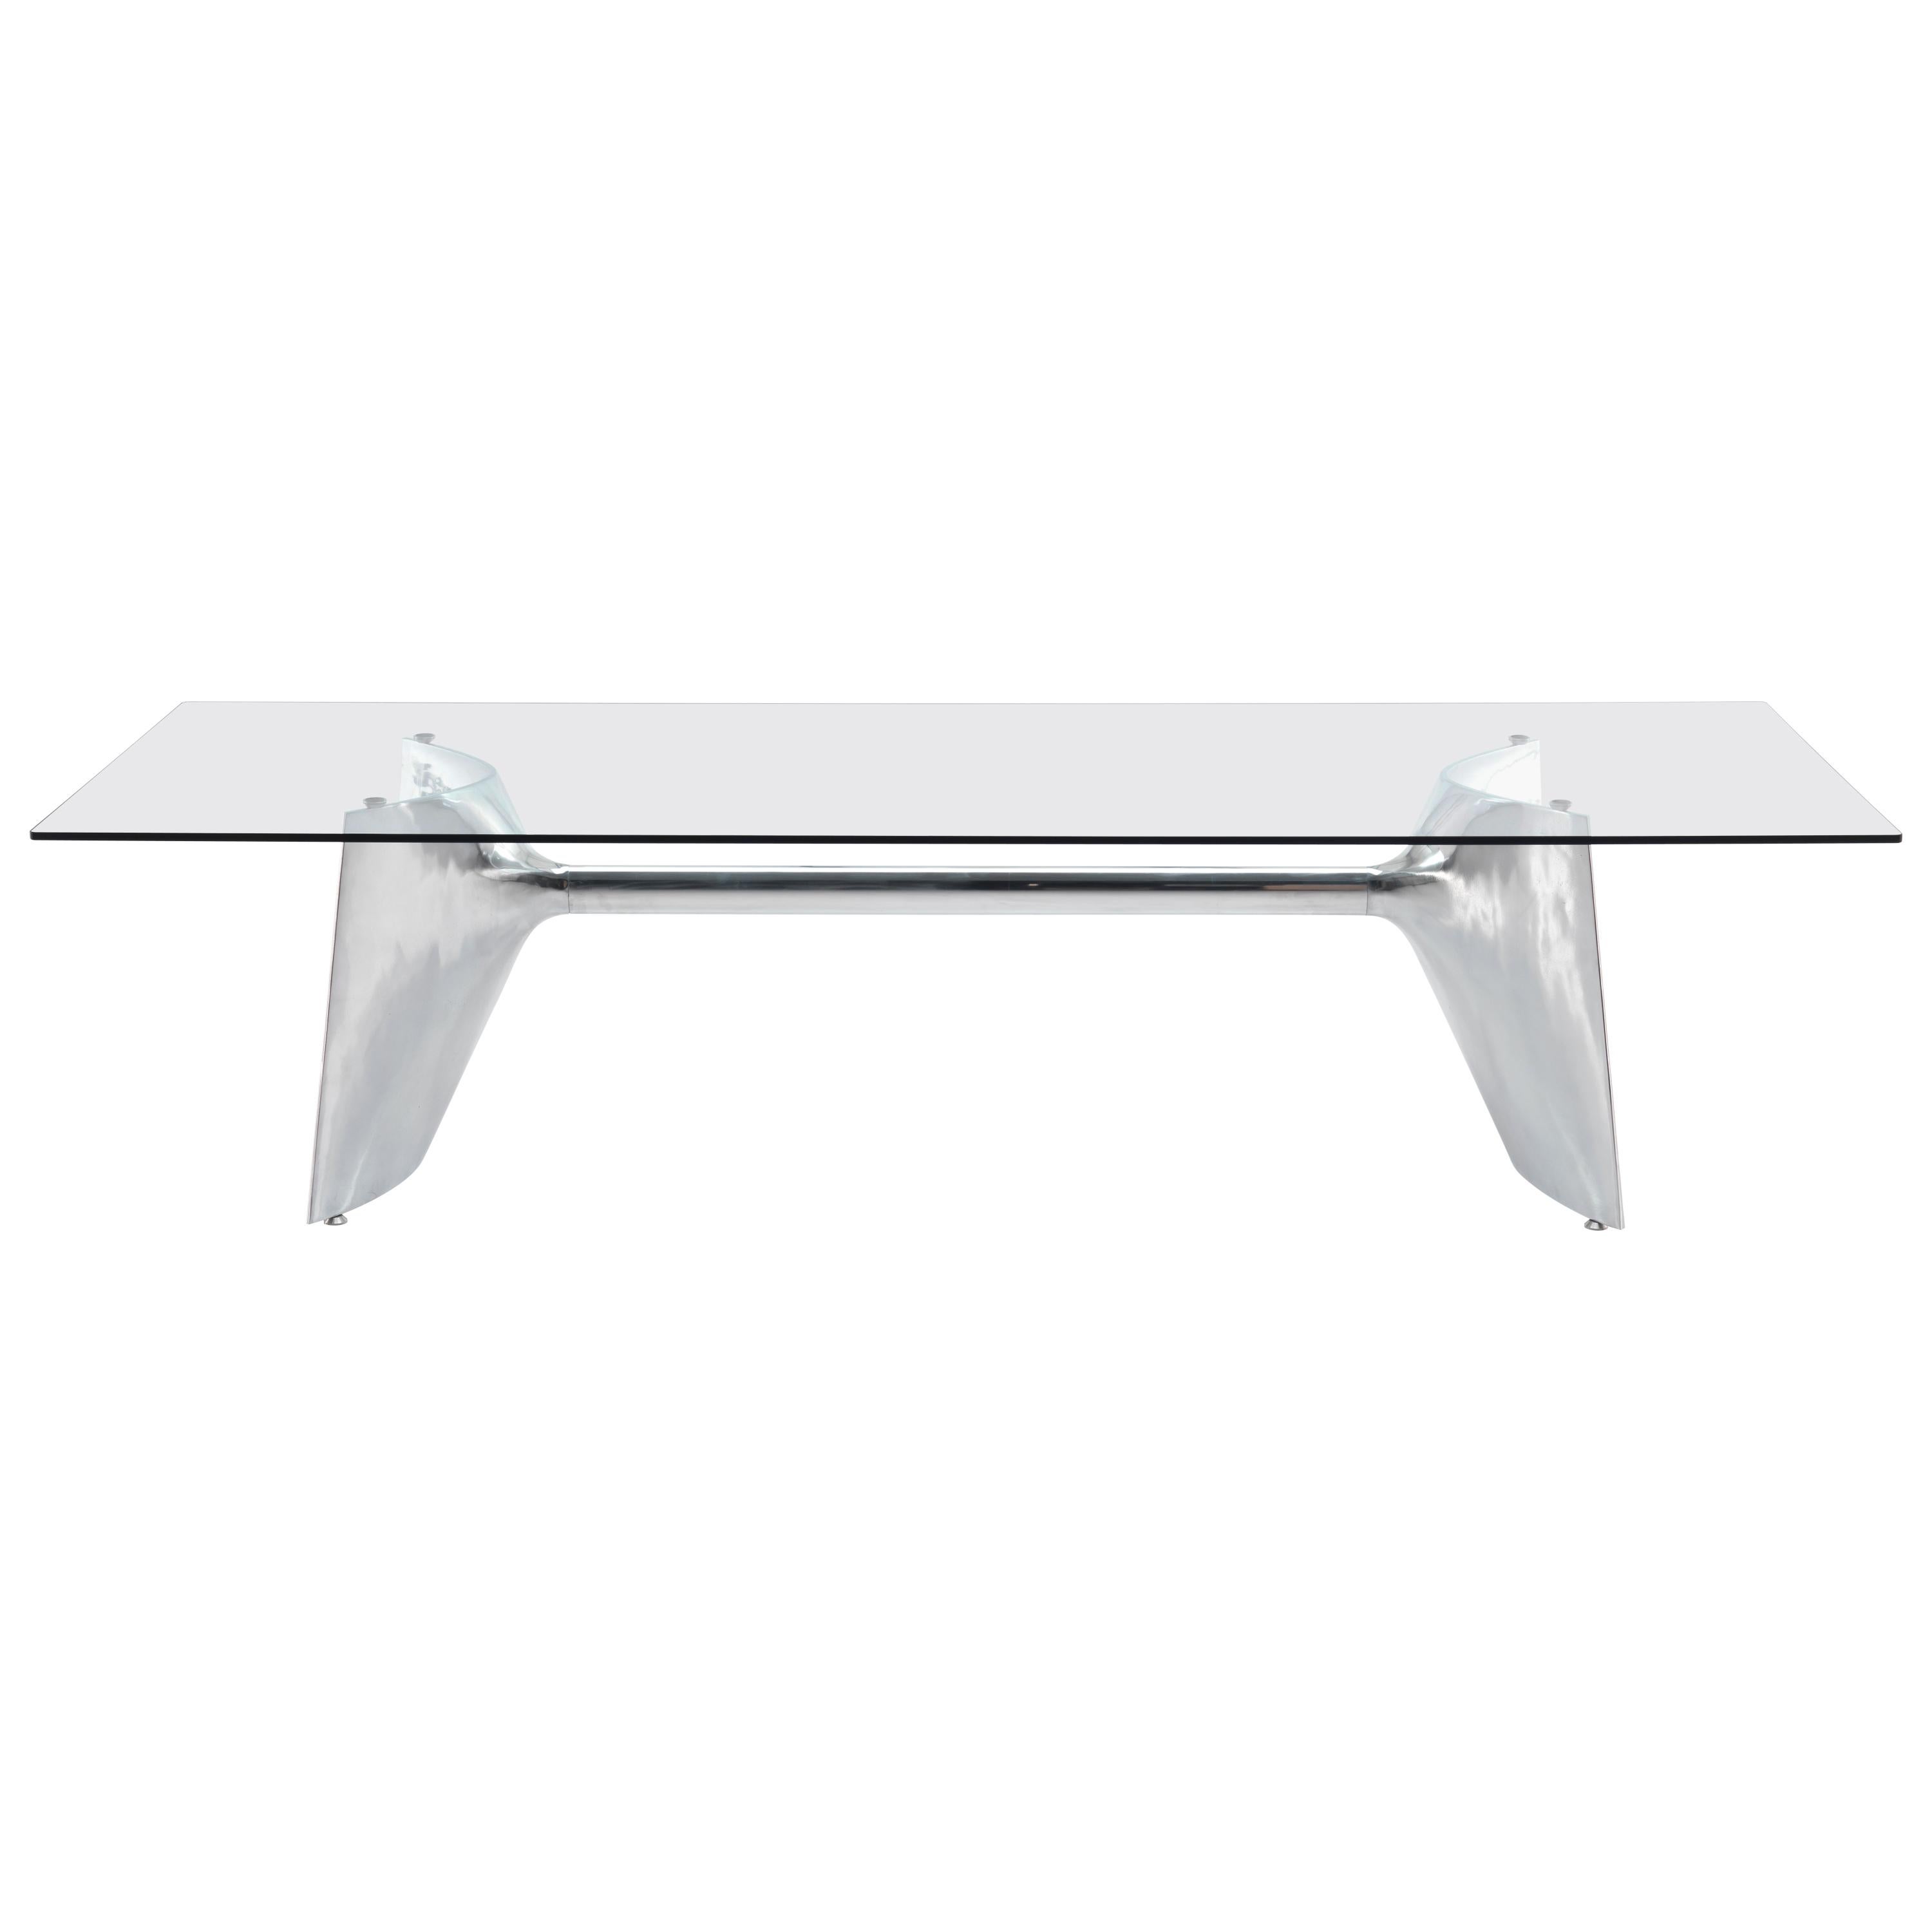 Baleri Italia Fratino High Rectangular Aluminum Table with Glass by Jeff Miller For Sale